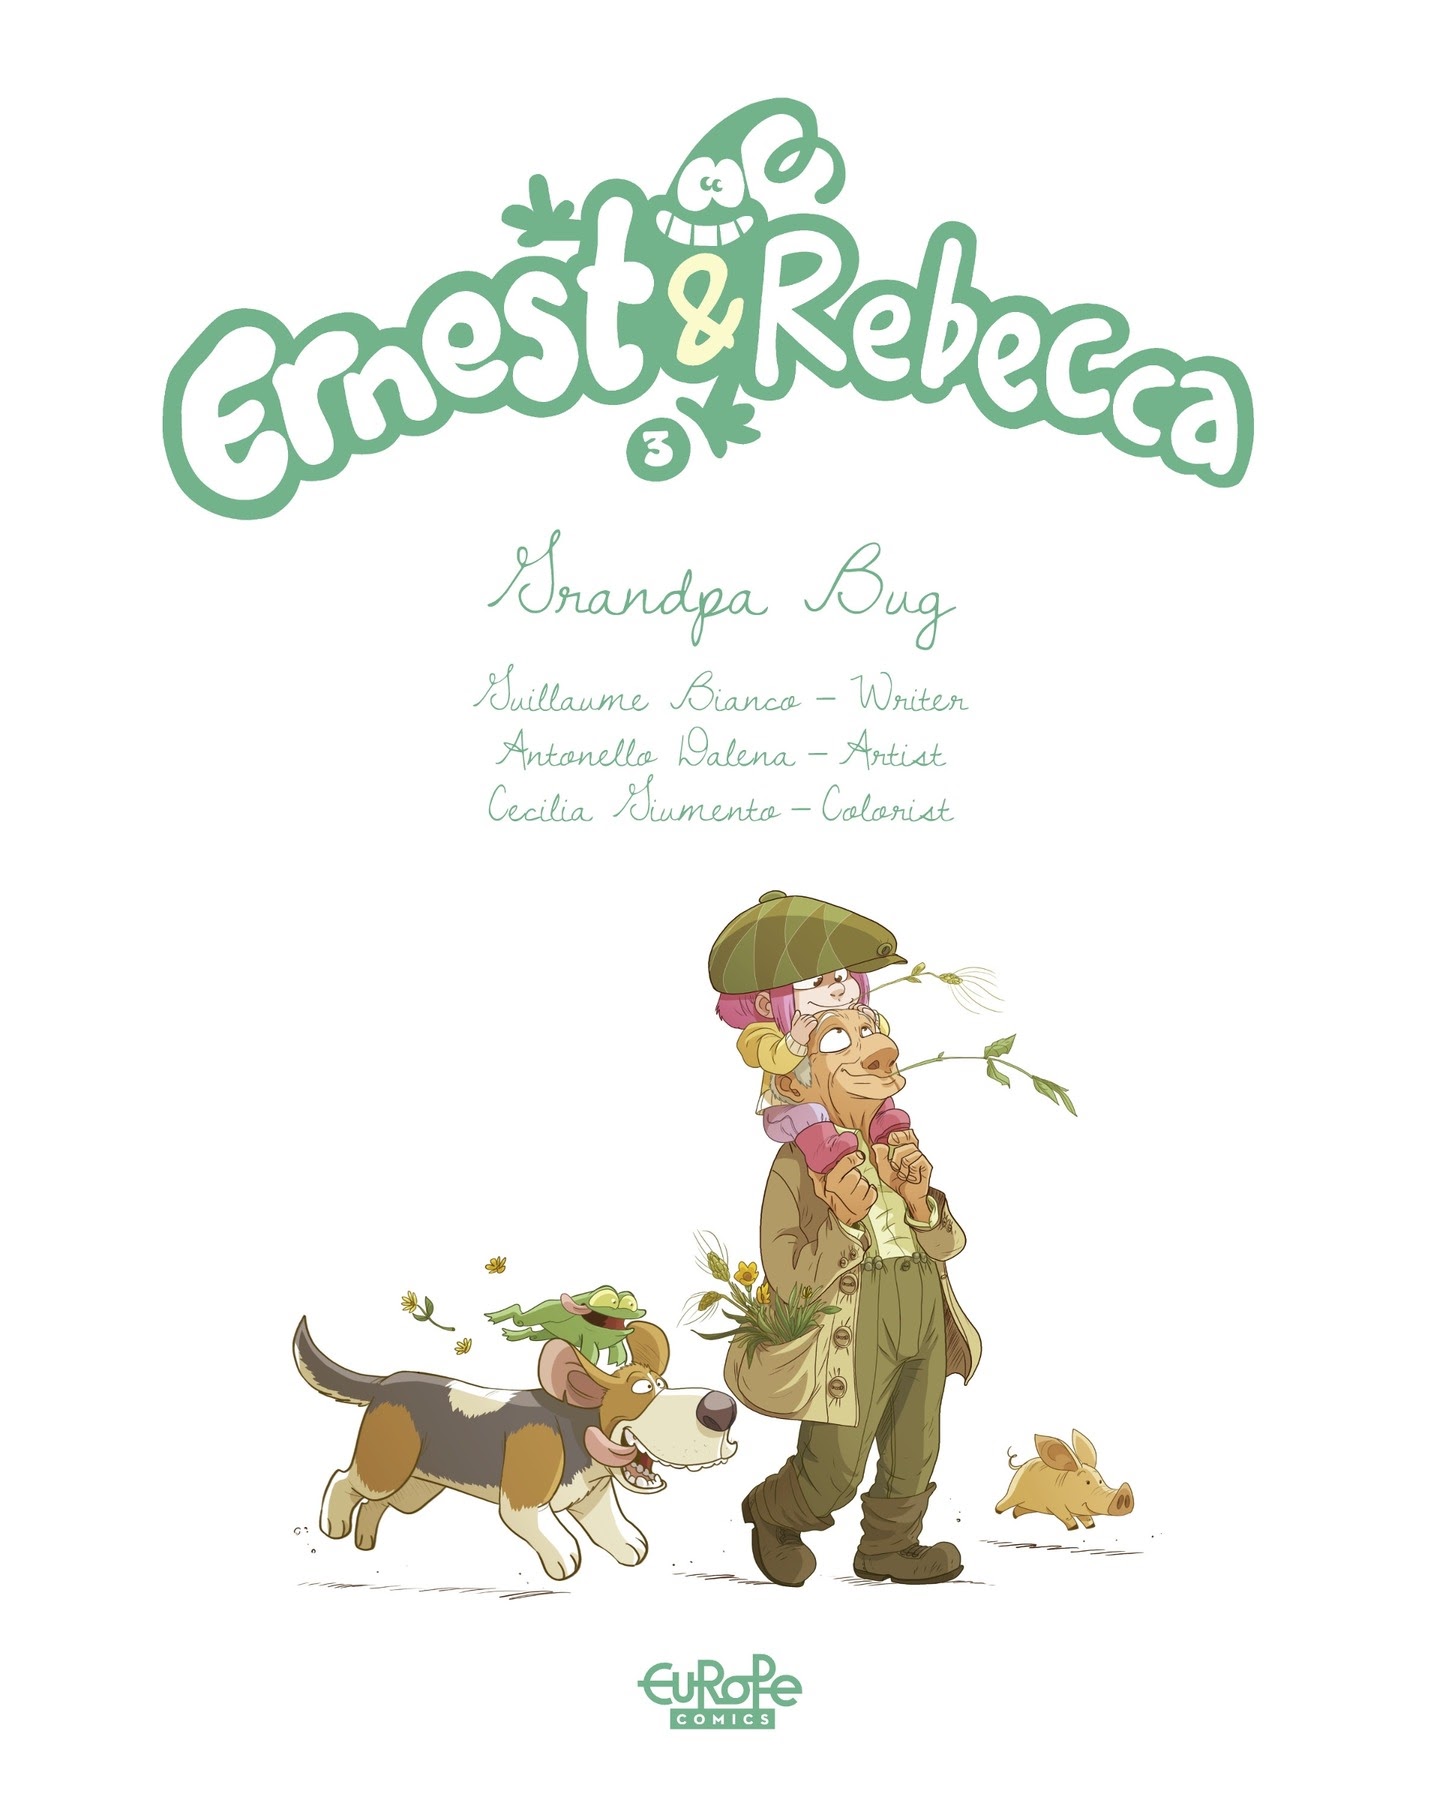 Read online Ernest & Rebecca comic -  Issue #3 - 3